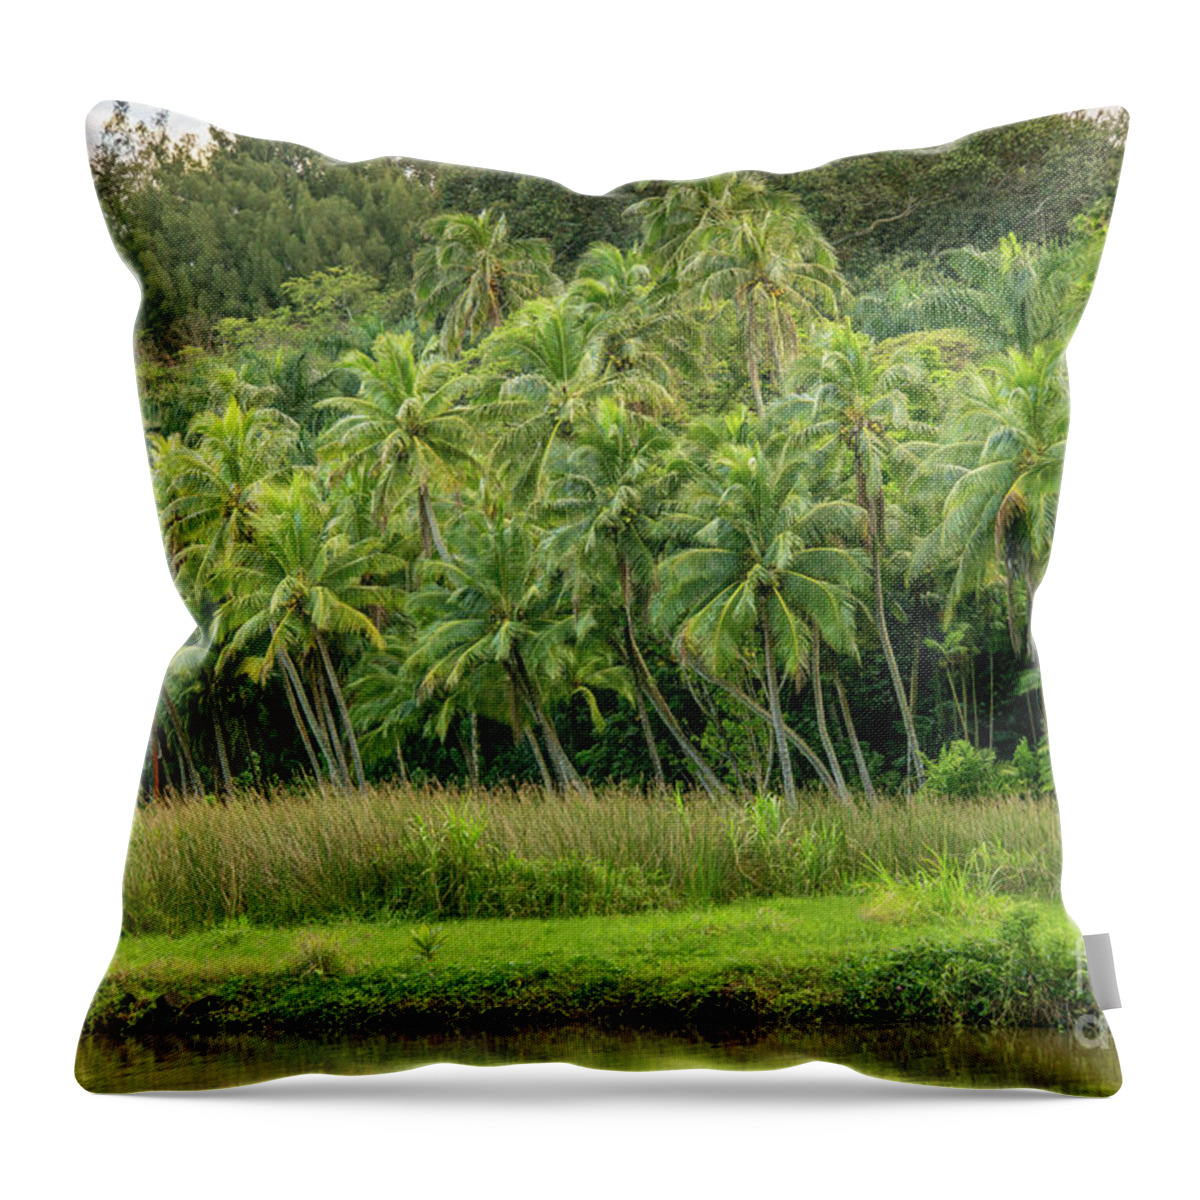 Hawaii Throw Pillow featuring the photograph Private Palm Tree Garden by Nancy Gleason